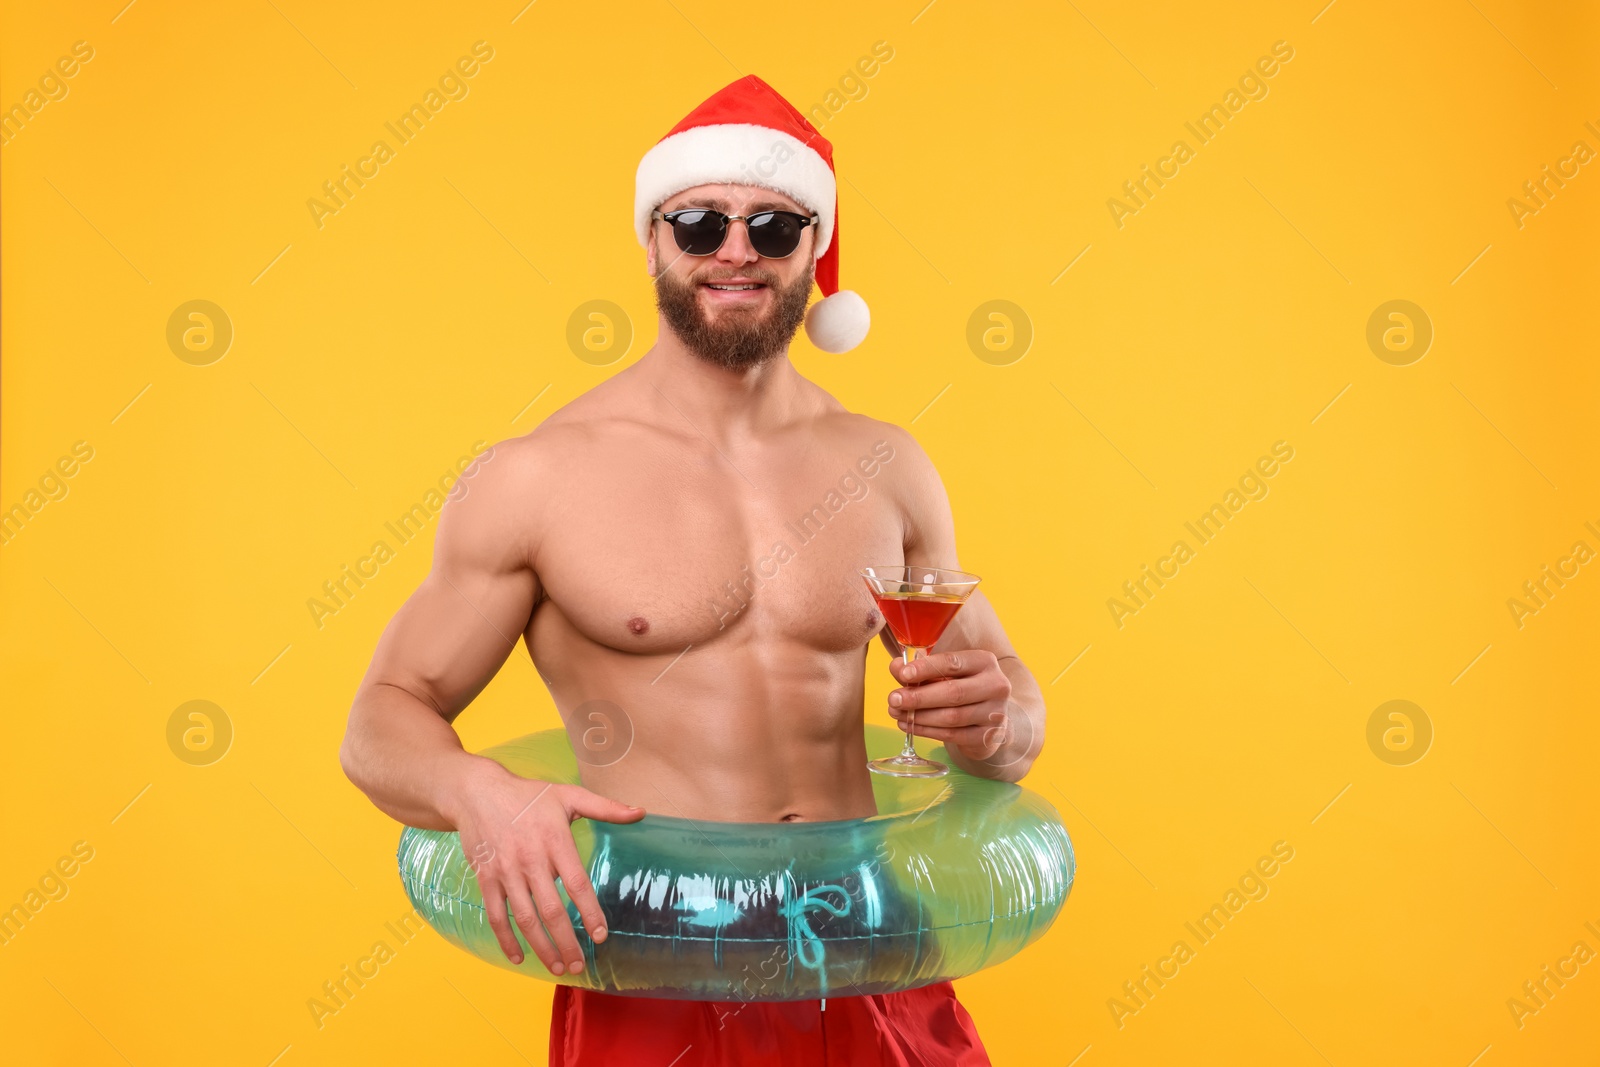 Photo of Muscular young man in Santa hat holding inflatable ring and cocktail on orange background. Space for text